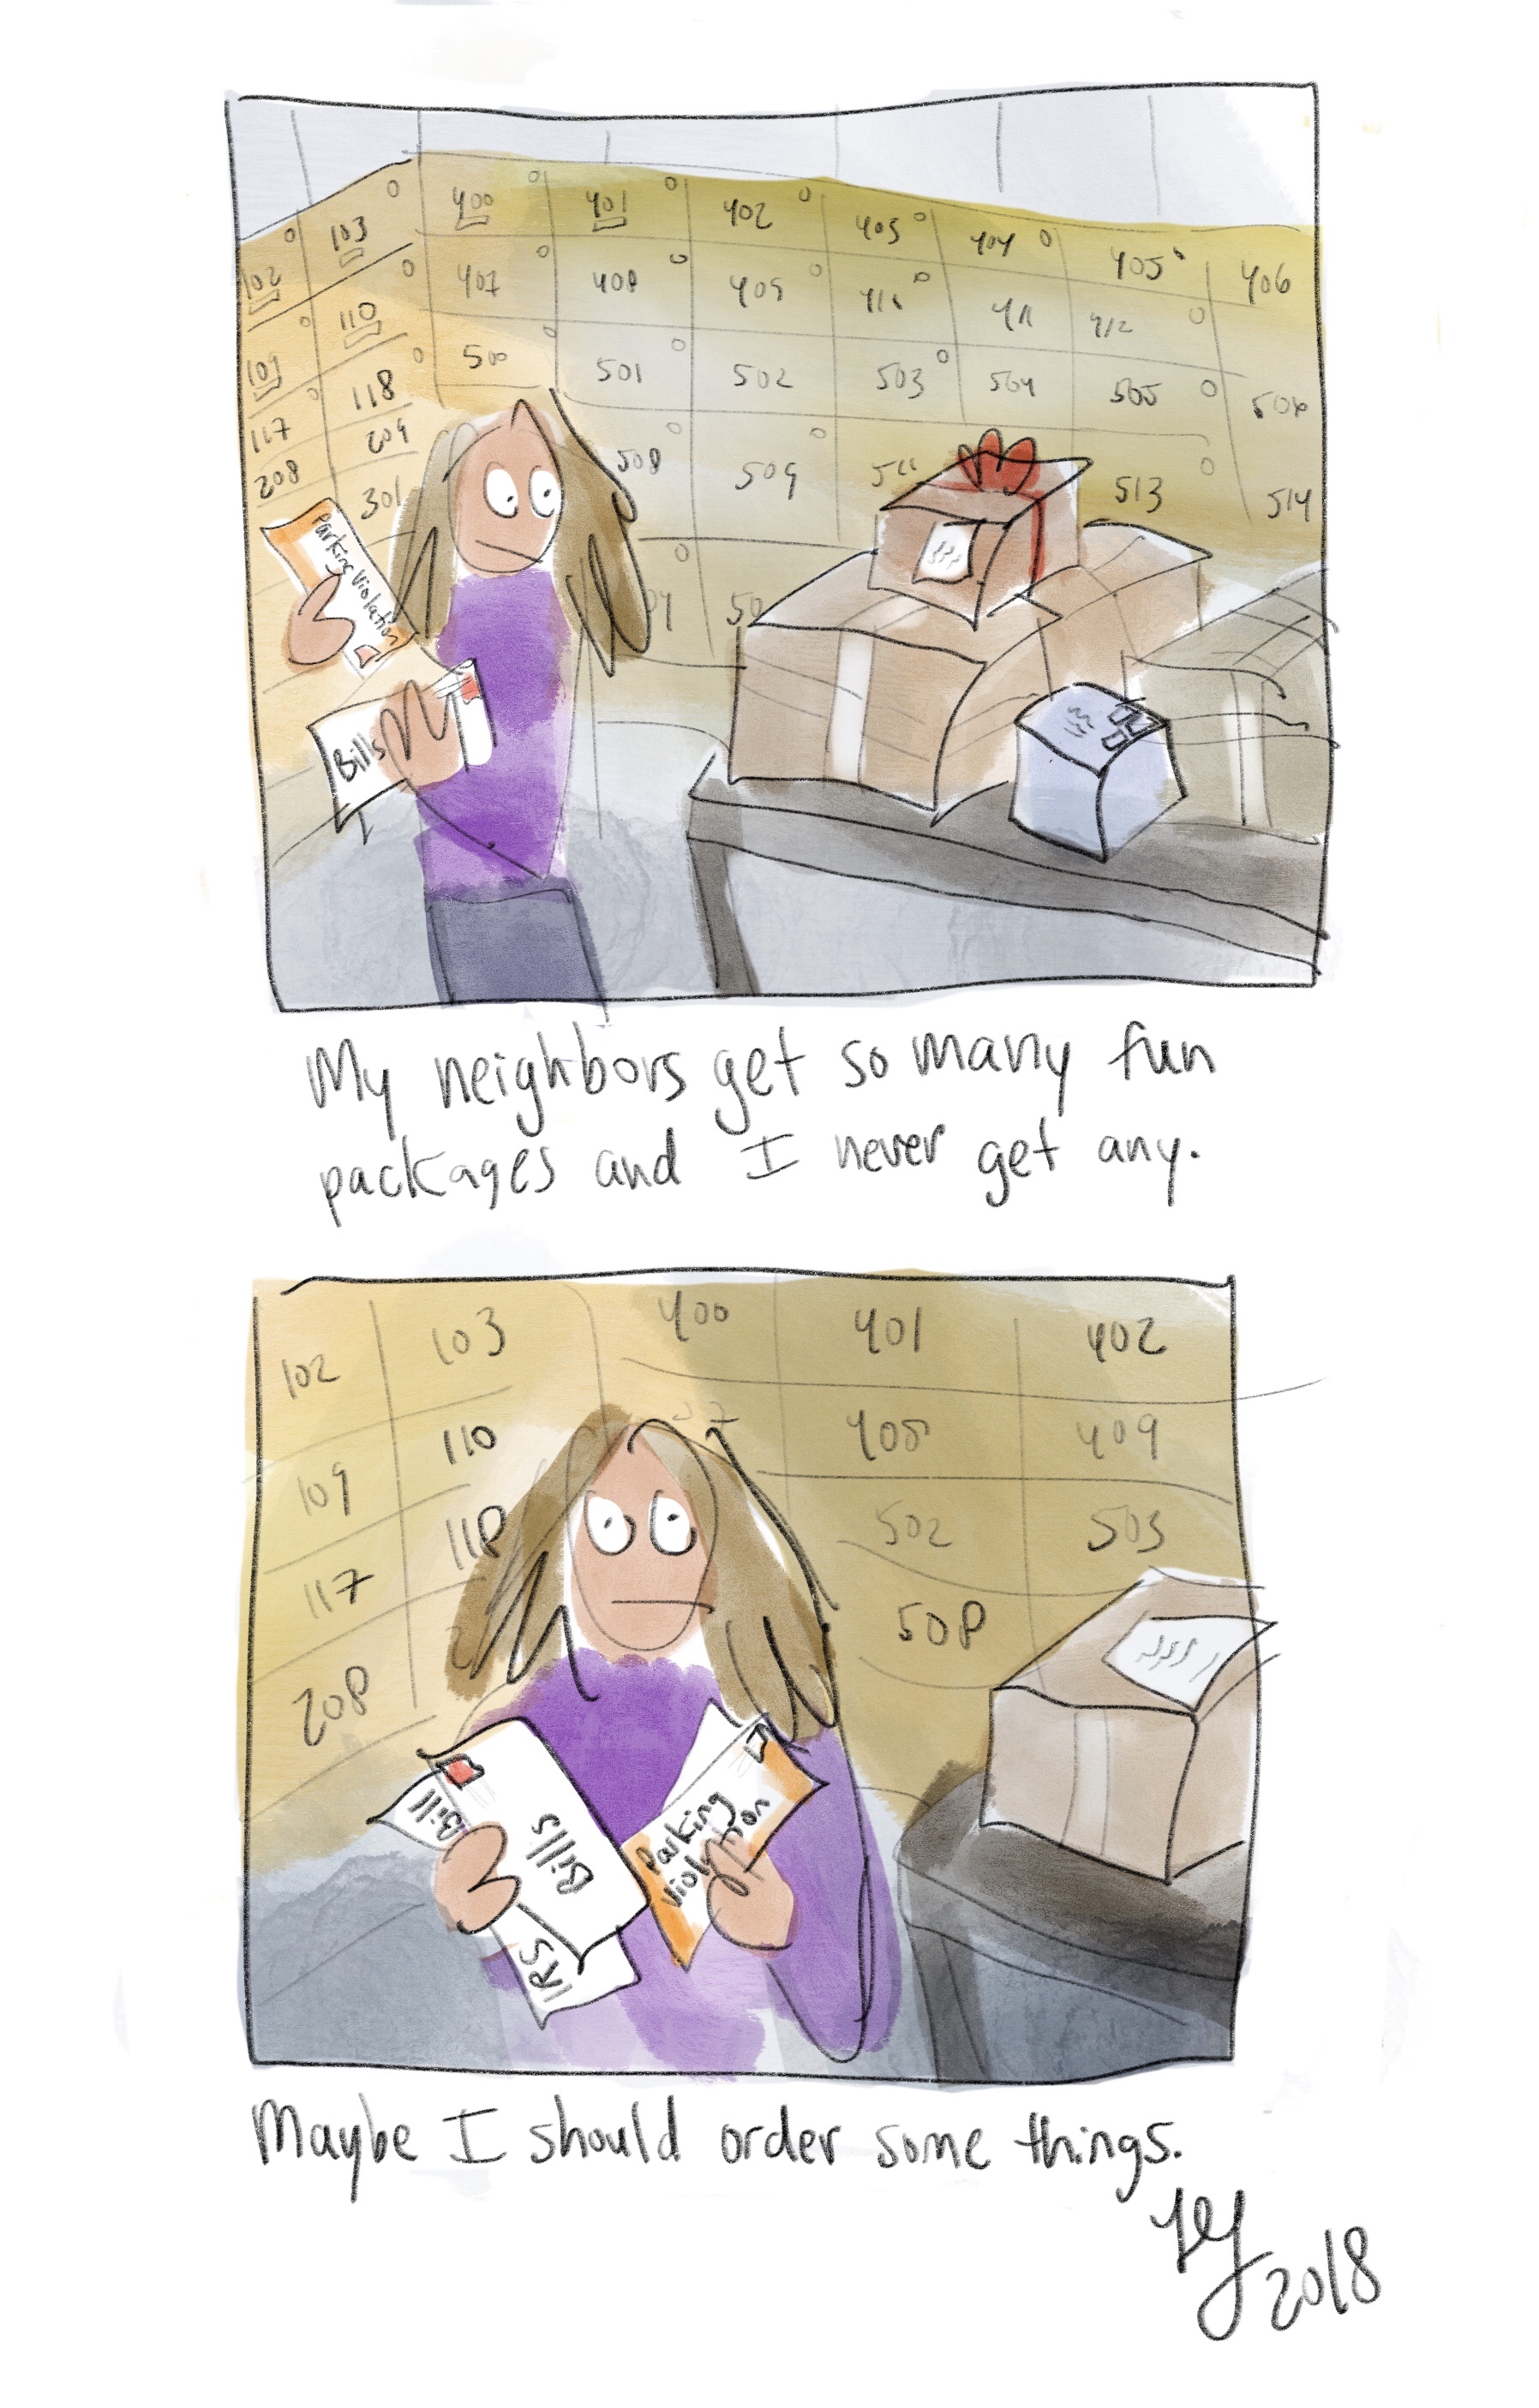 I drew this comic because my neighbors are always getting fun packages, and I never get any. I am thinking I should order some things. I want some things.